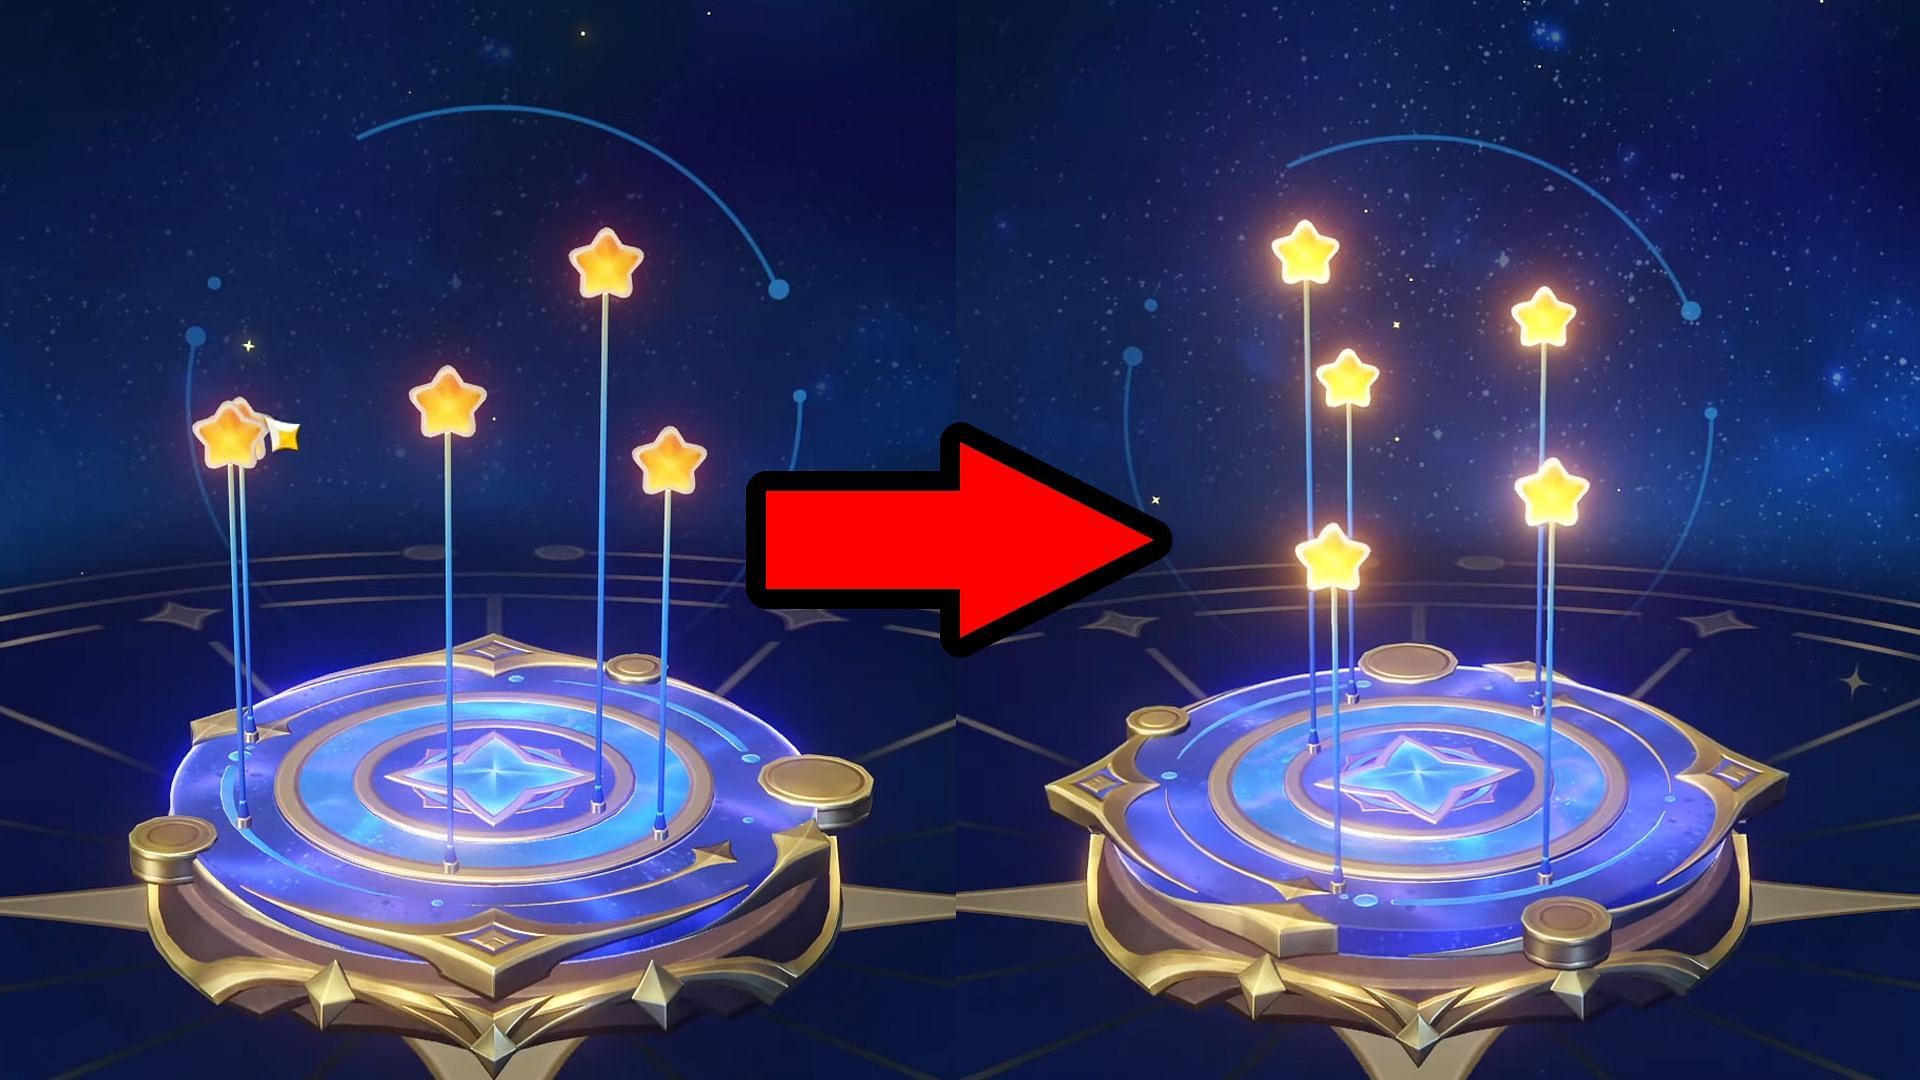 The start of the puzzle versus the end of it (Image via HoYoverse)